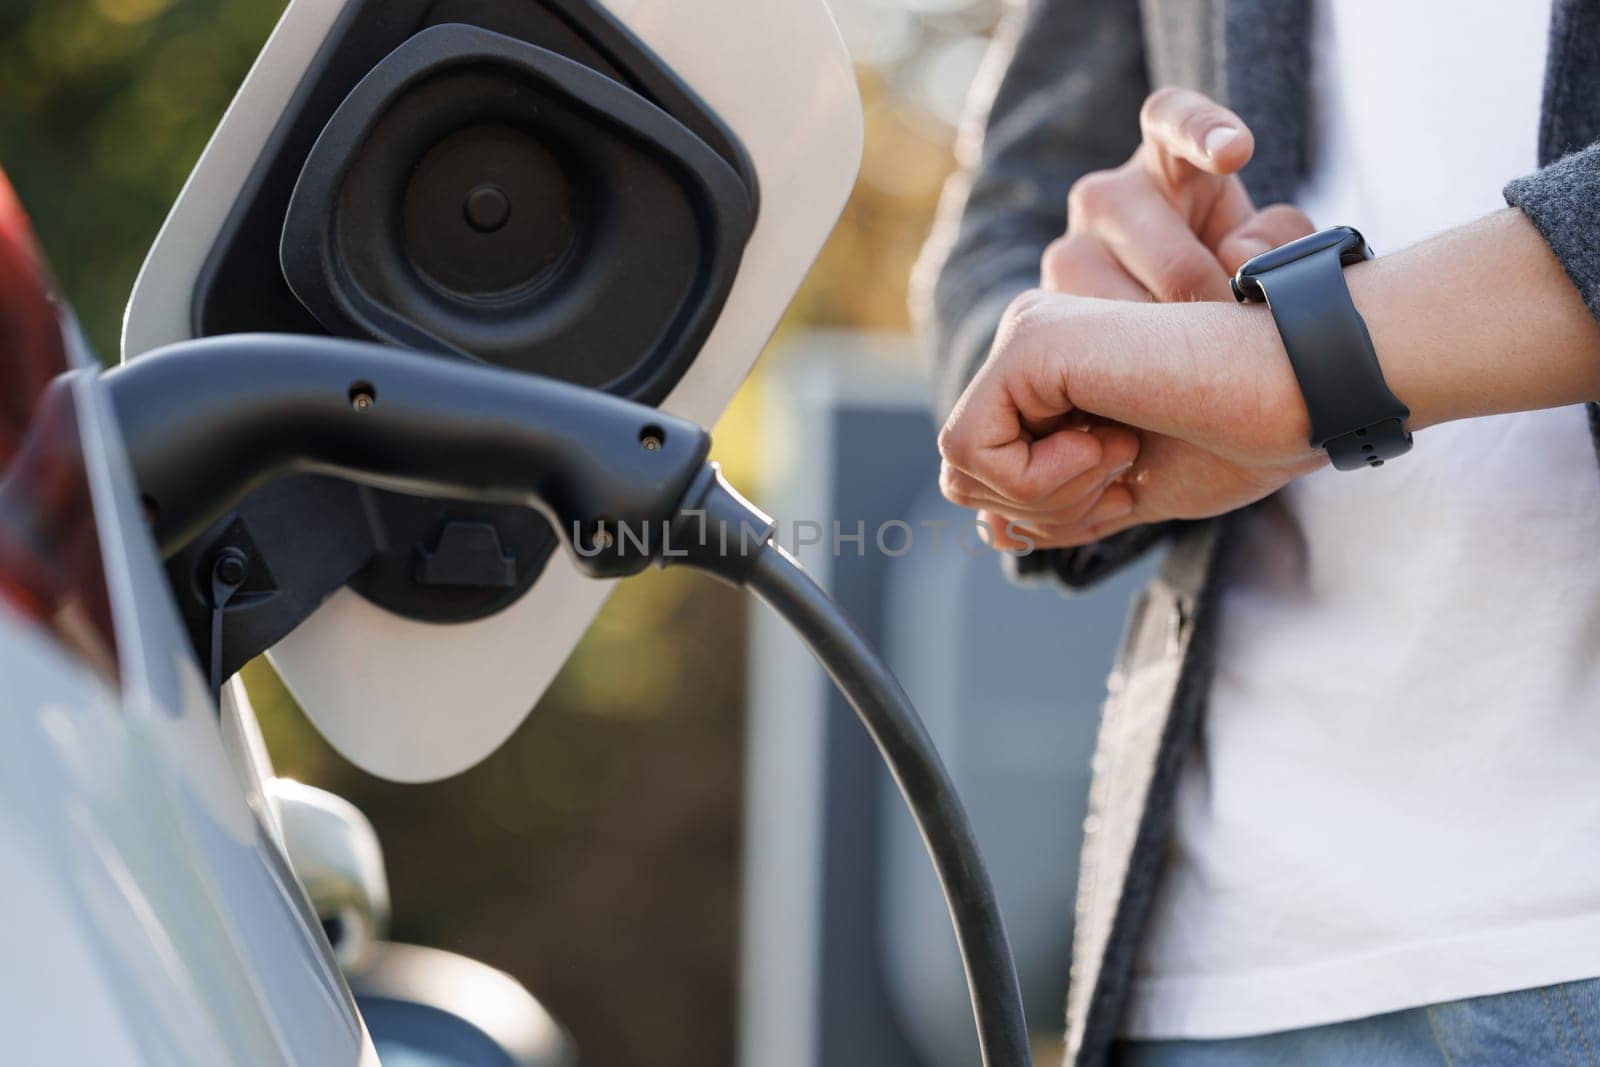 Businessman plugging in charging cable to to electric vehicle. Male hand inserts power connector into EV car and charges batteries, uses smartwatch for activates start charging by uflypro